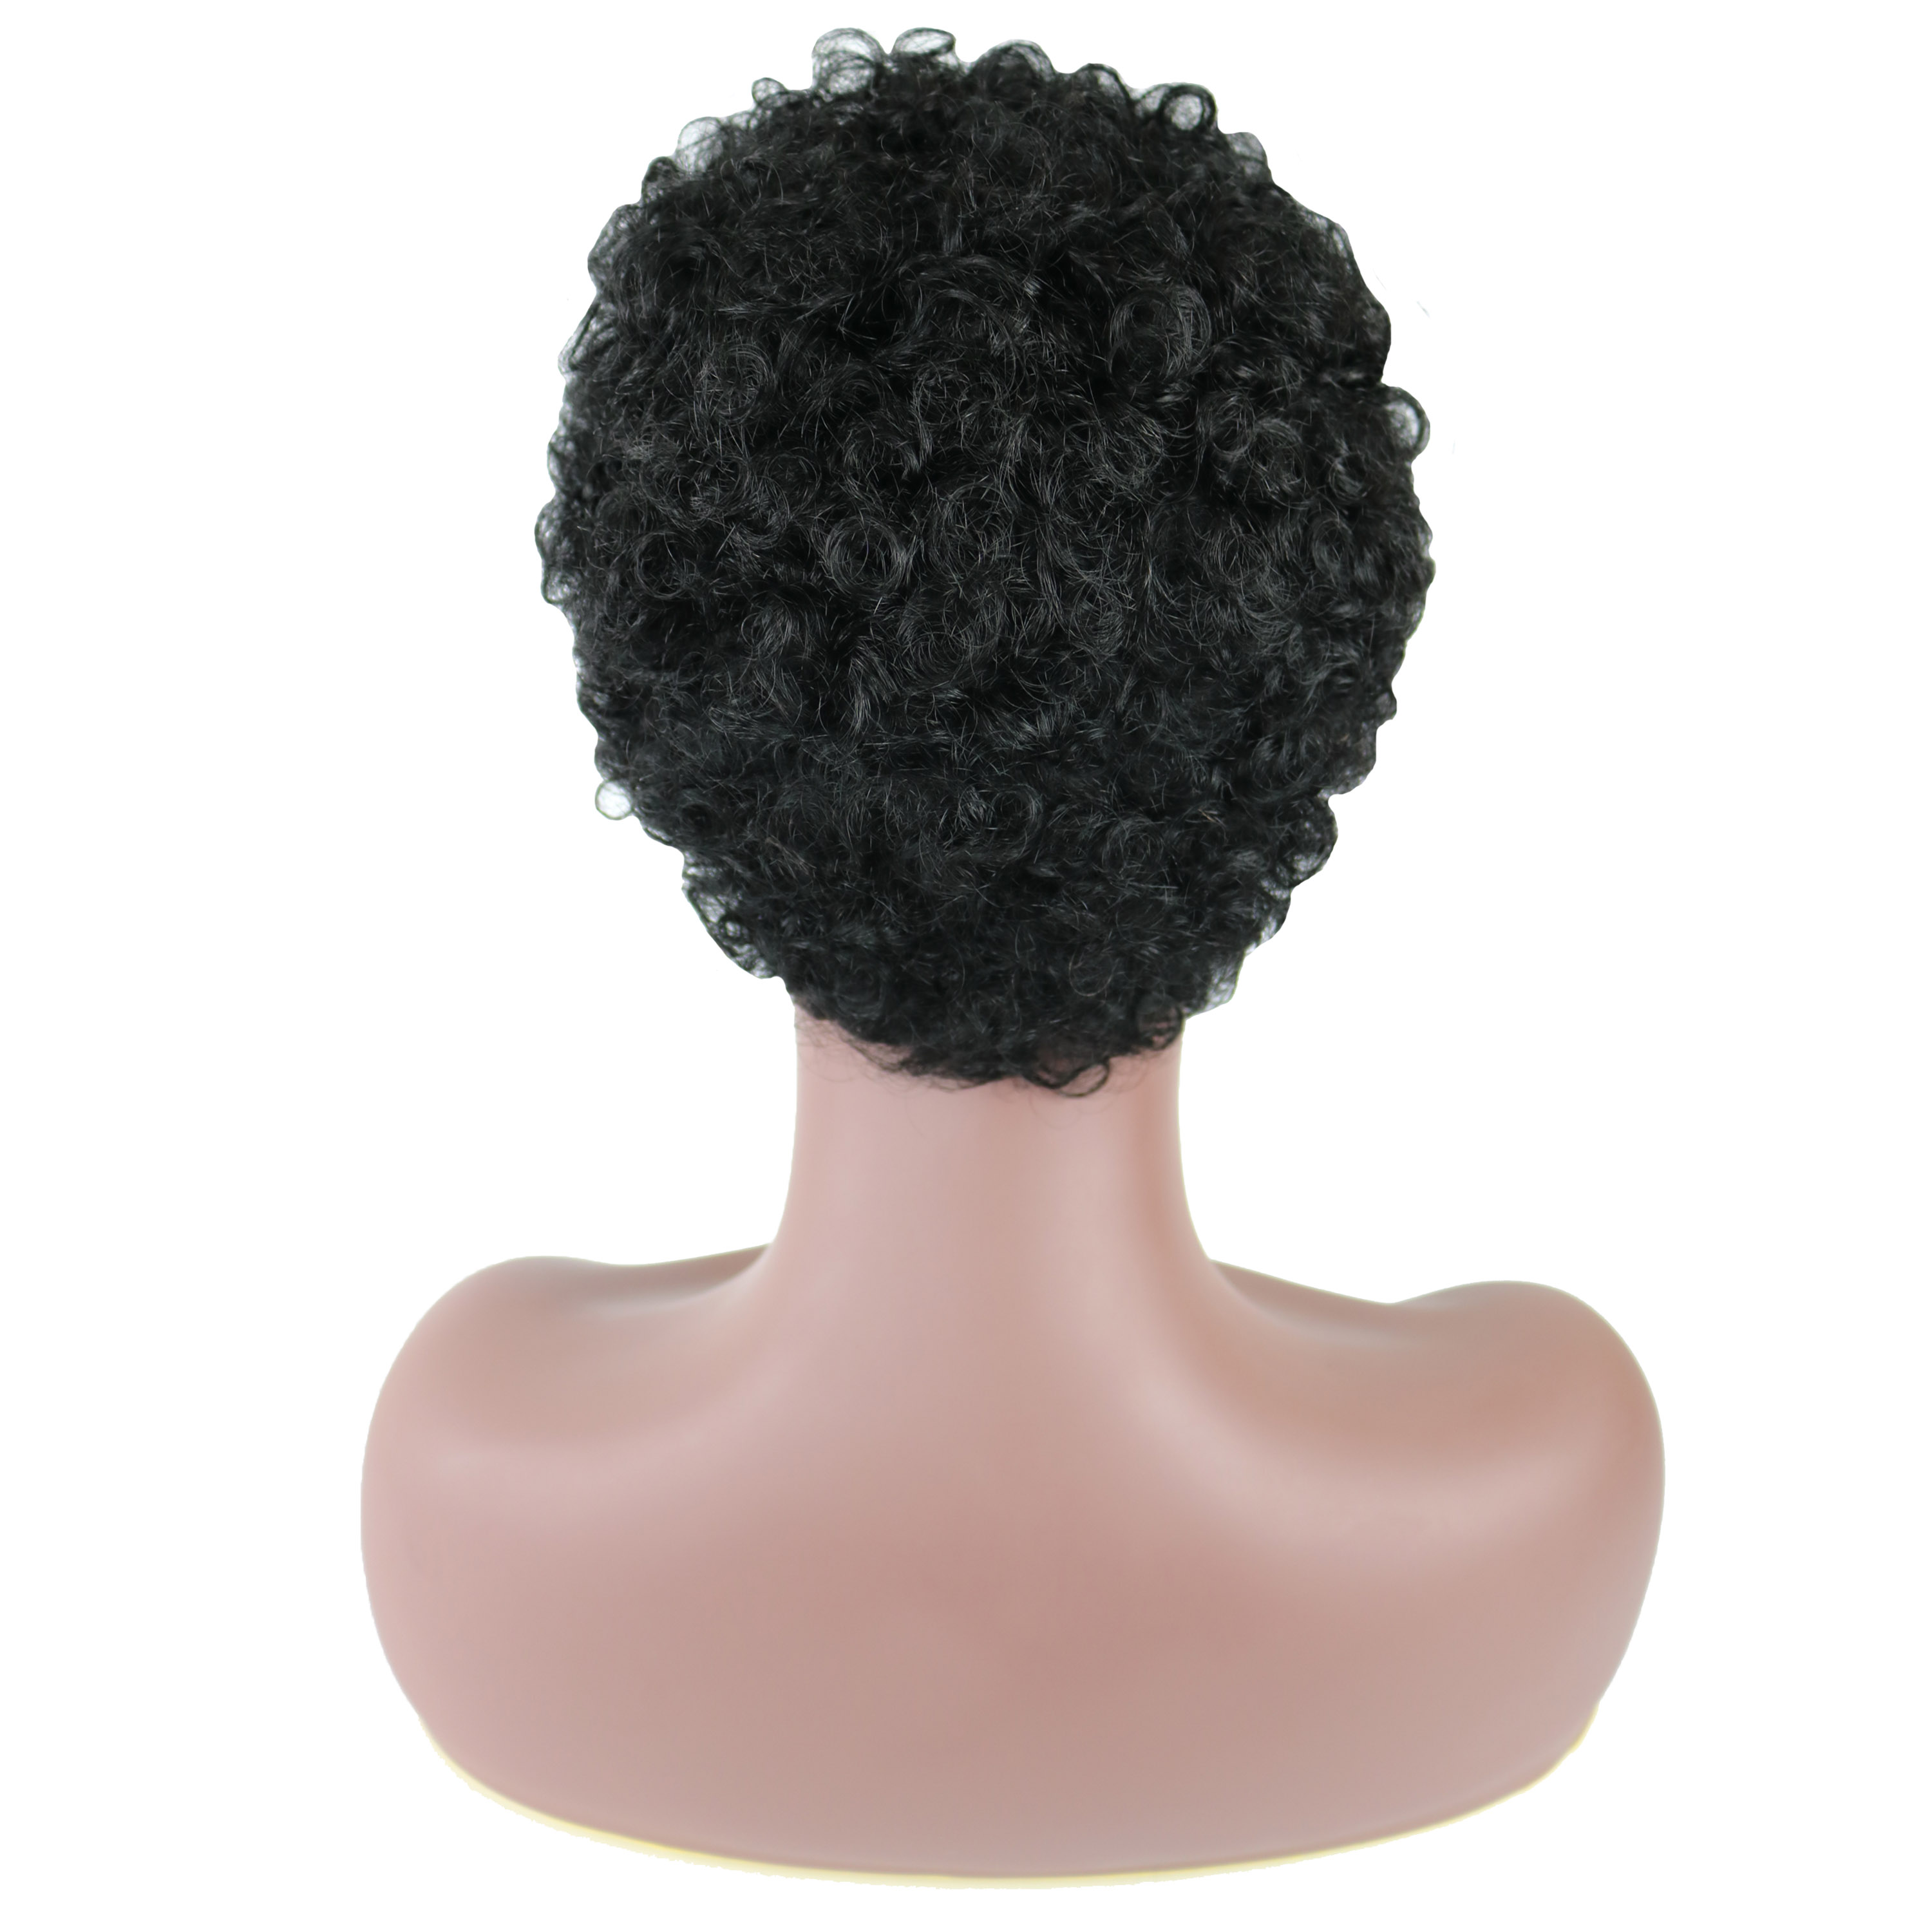 African American Short Kinky Curly Human Hair Capless Wigs